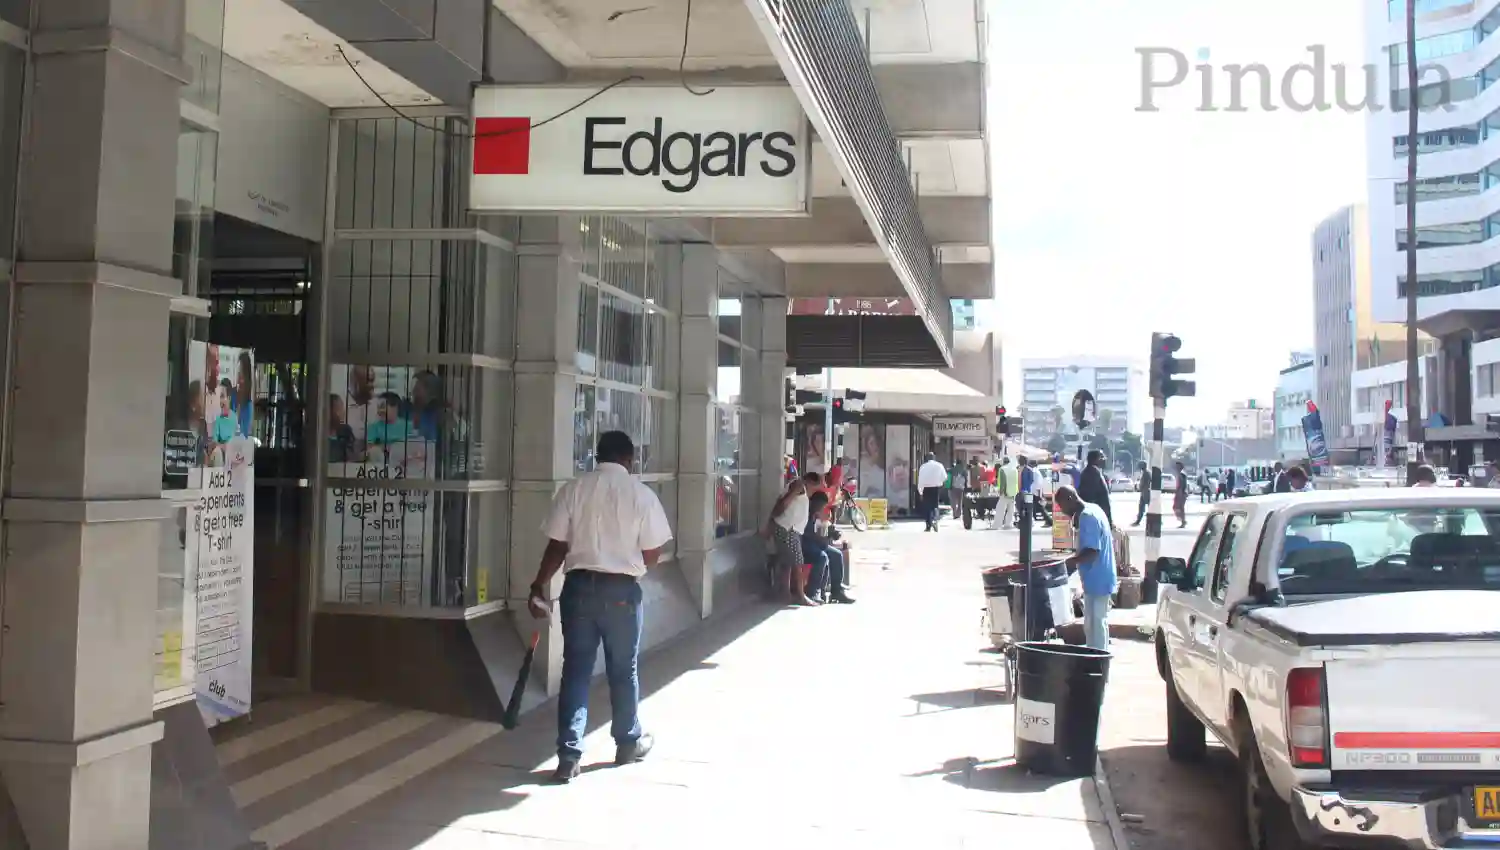 Edgars Temporarily Closes Gweru Branch After Employee Contracts COVID-19